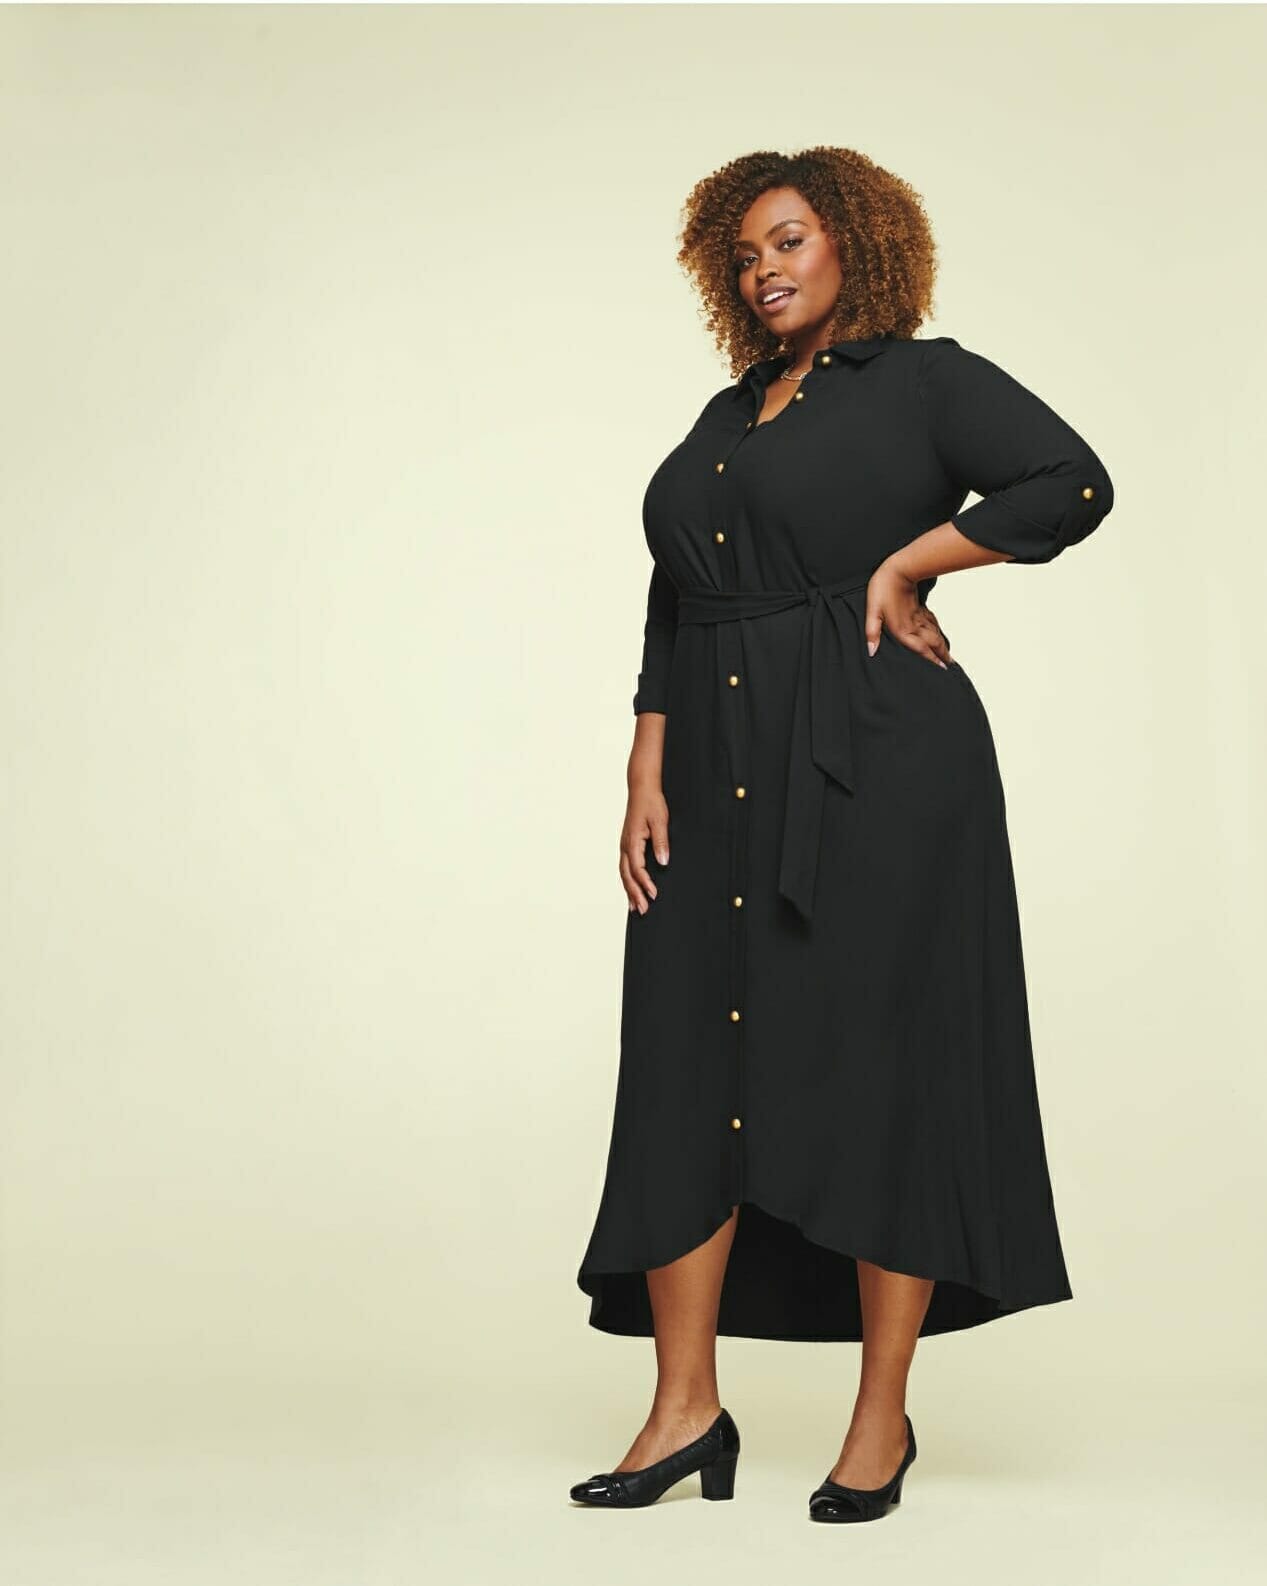 New Plus Size Dresses for Curvy Women, Long Maxi Clothes Party Casual  V-Neck 3/4 Sleeve Dress,Ture to Size. (US, Numeric, 14, 16, Plus, Regular,  Black) at  Women's Clothing store